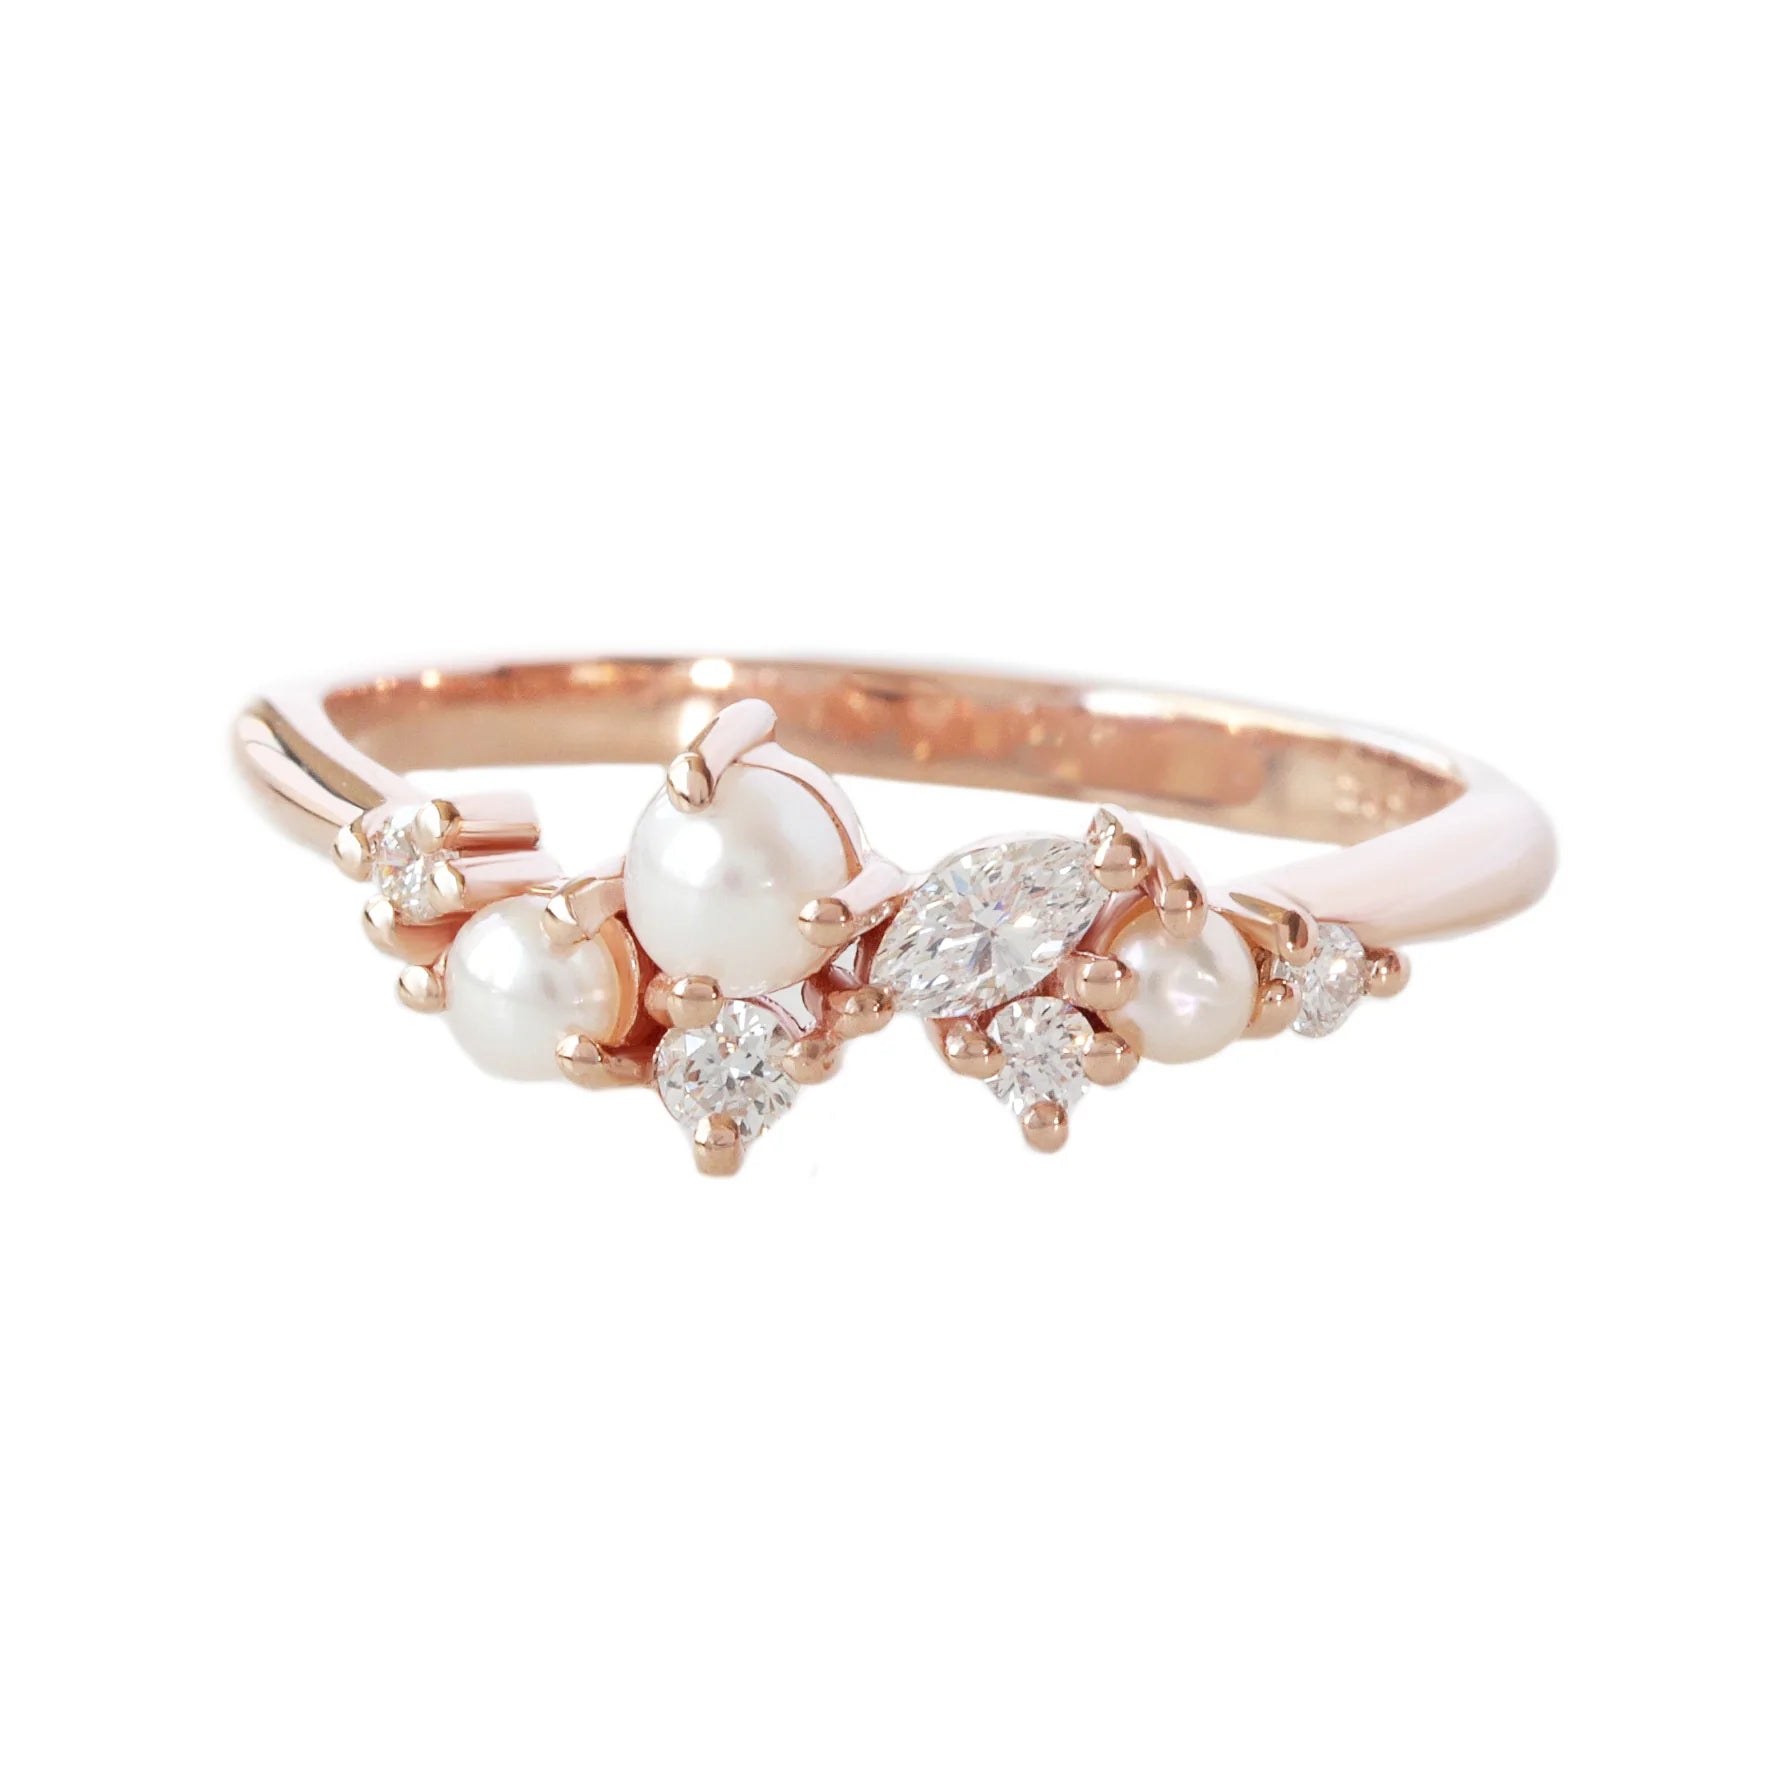 Pearls & Diamonds Wedding Band - Evi, 14K Rose Gold, Size 6.5, READY TO SHIP! ♥